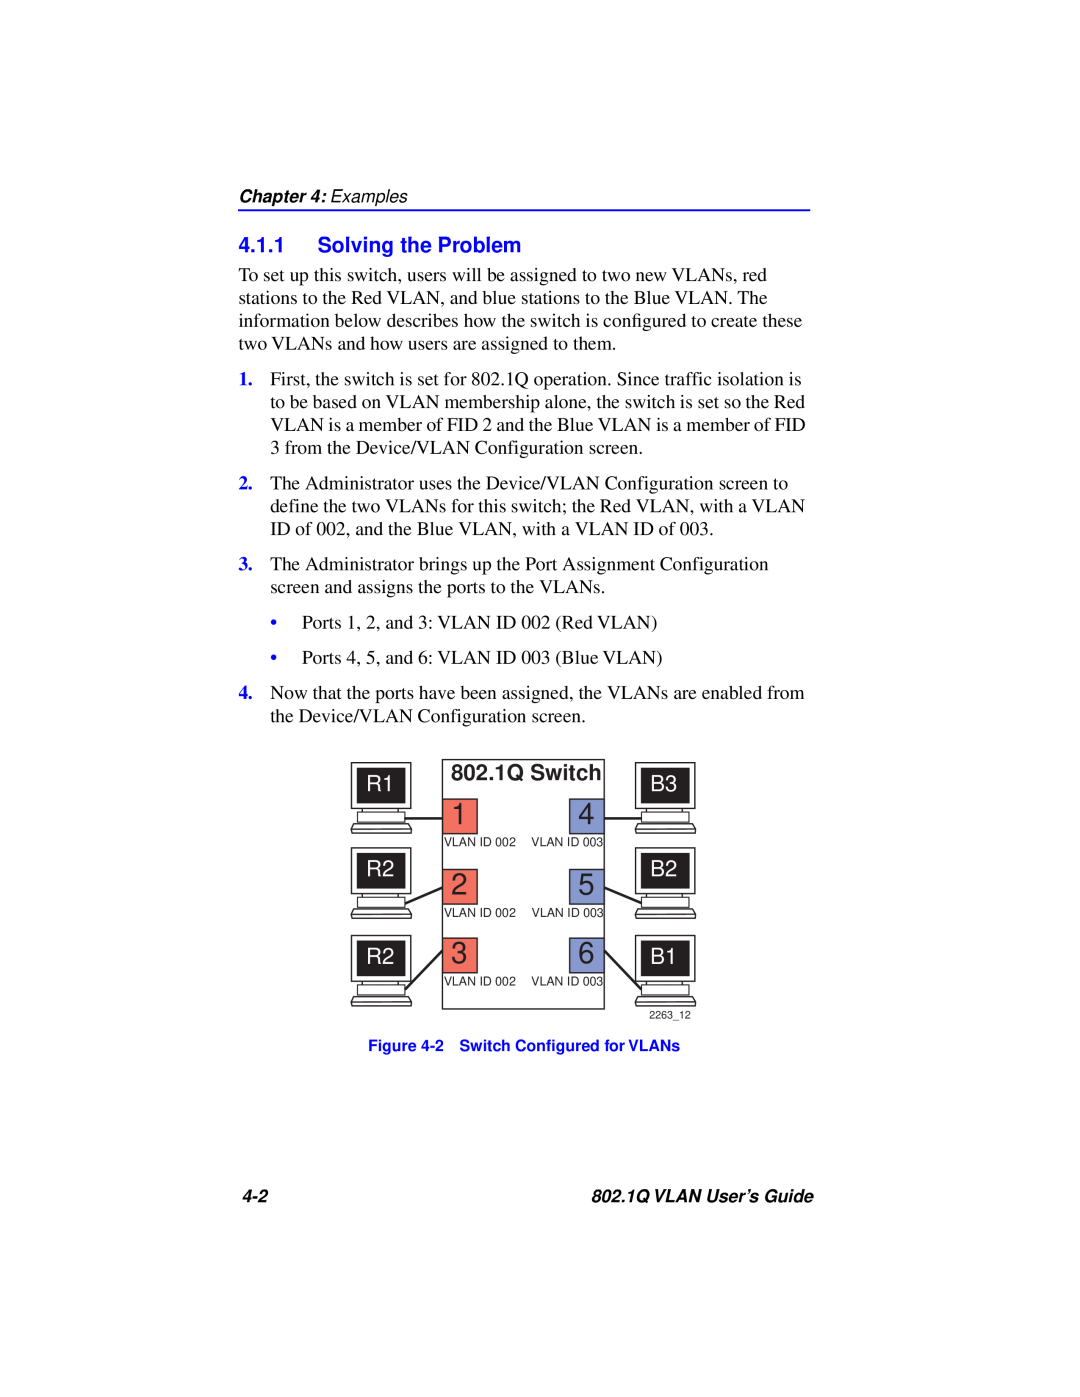 Cabletron Systems manual Solving the Problem, 802.1Q Switch, B3 B2 B1 